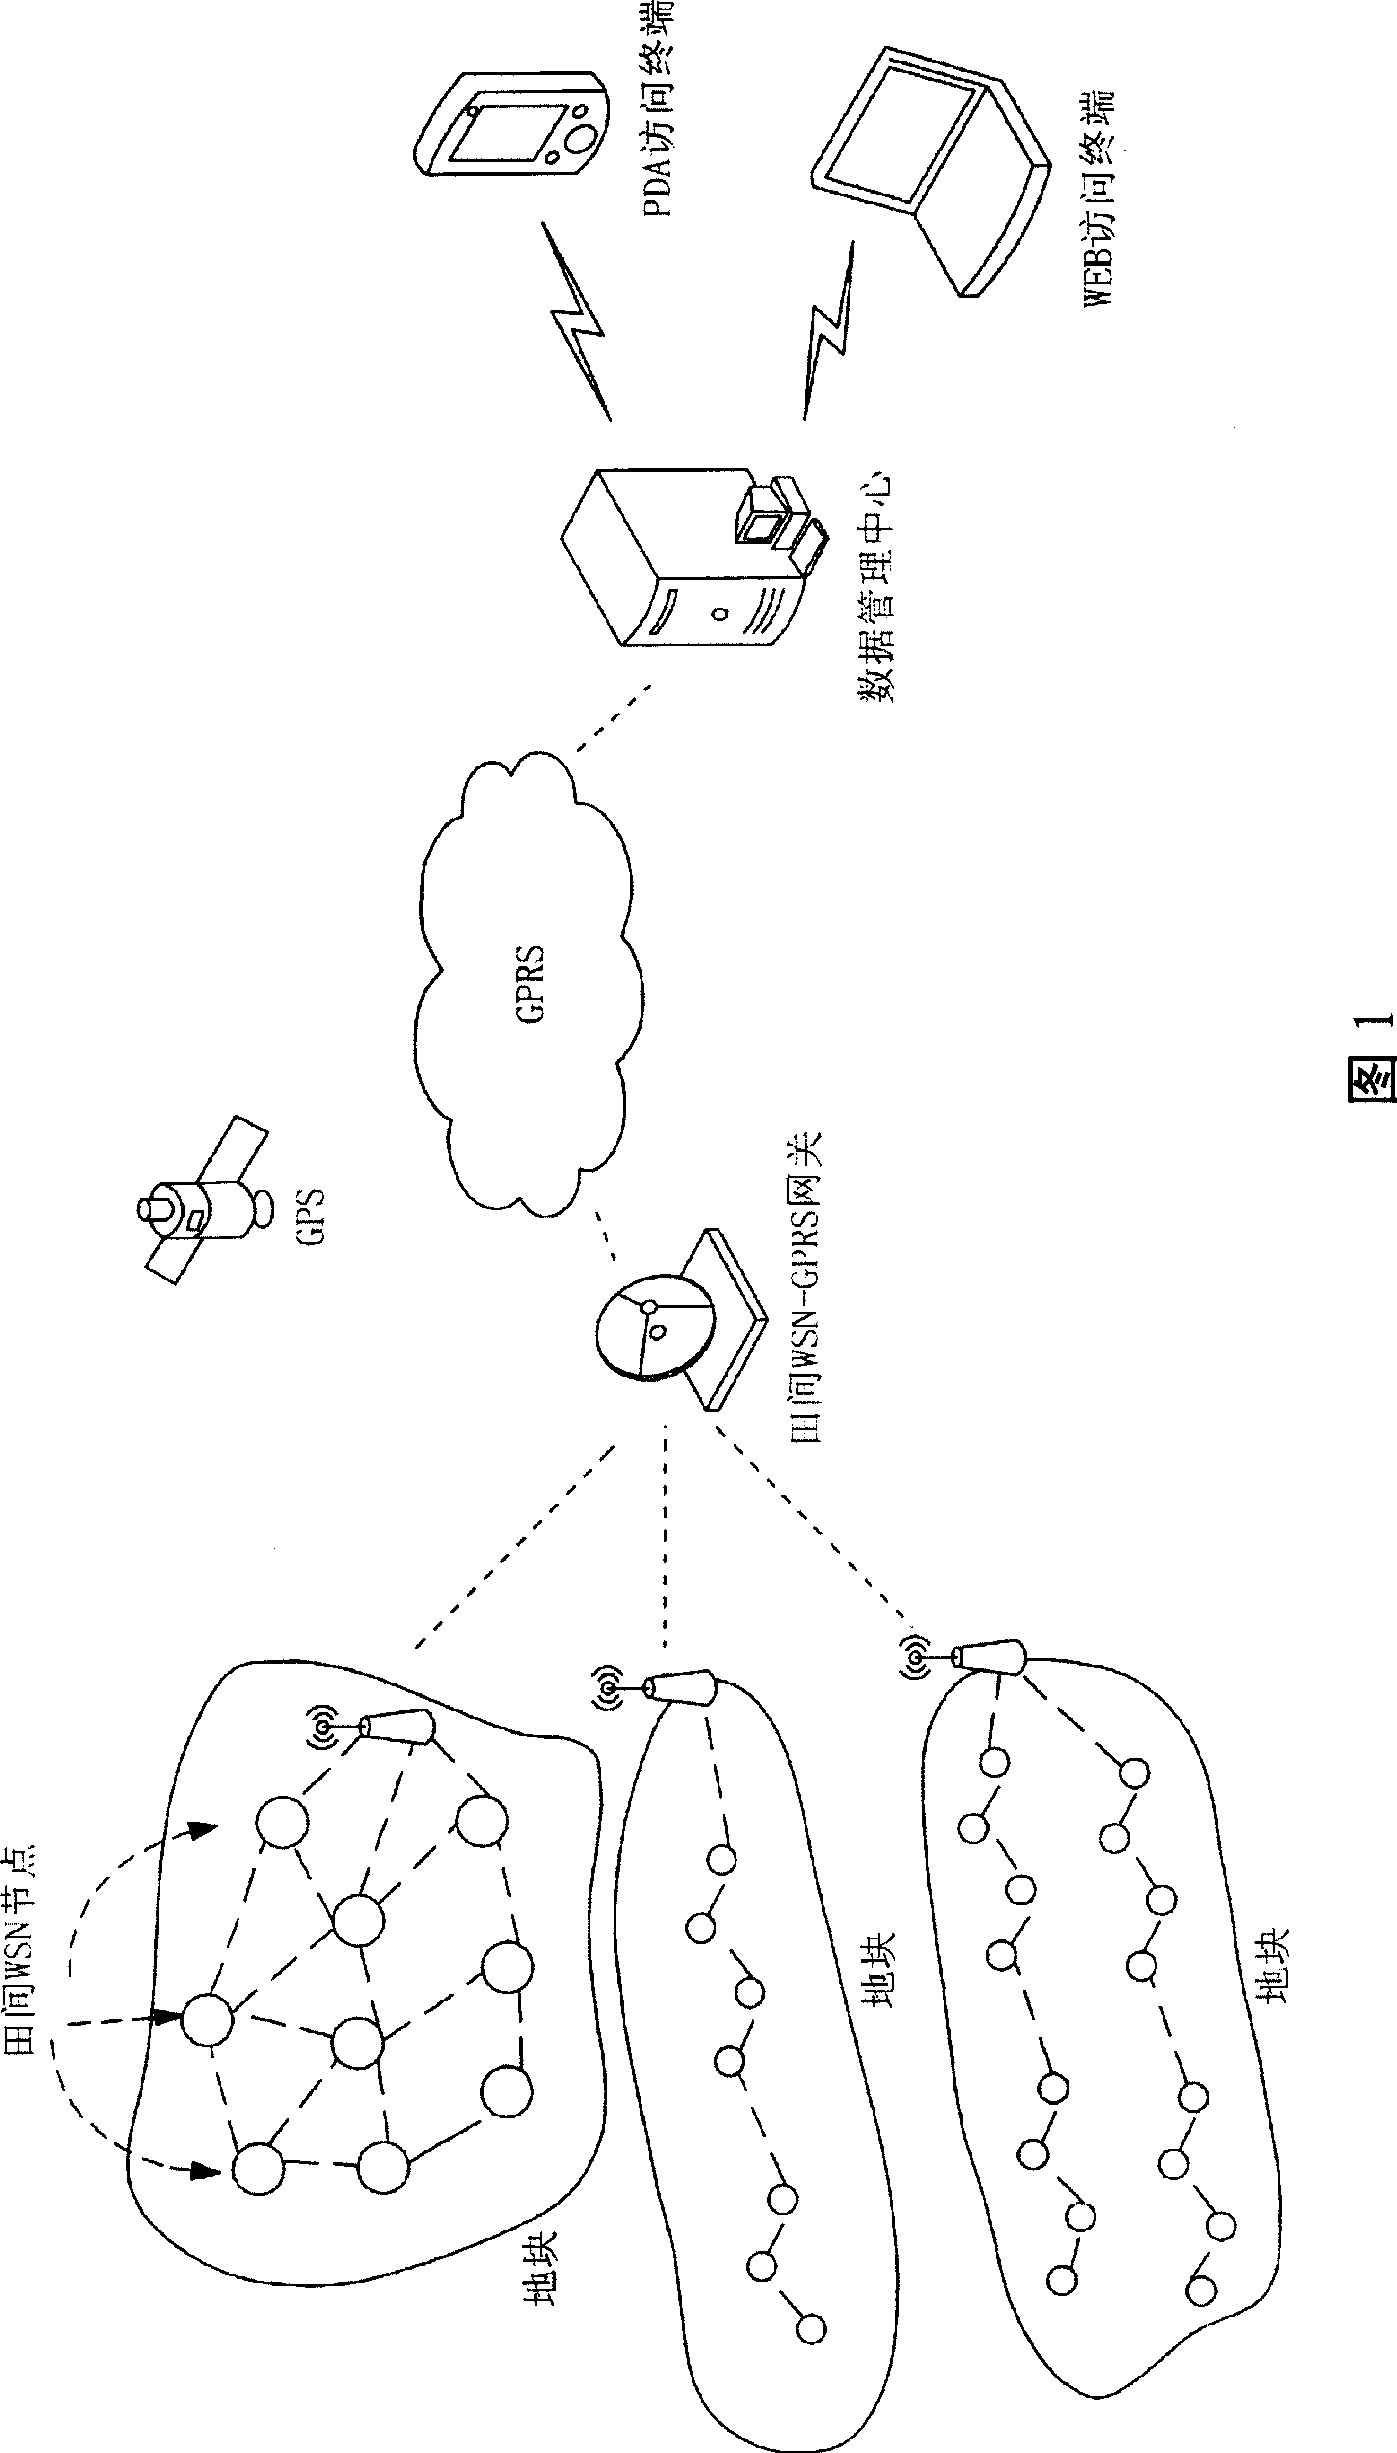 Farm land soil information collecting system and method